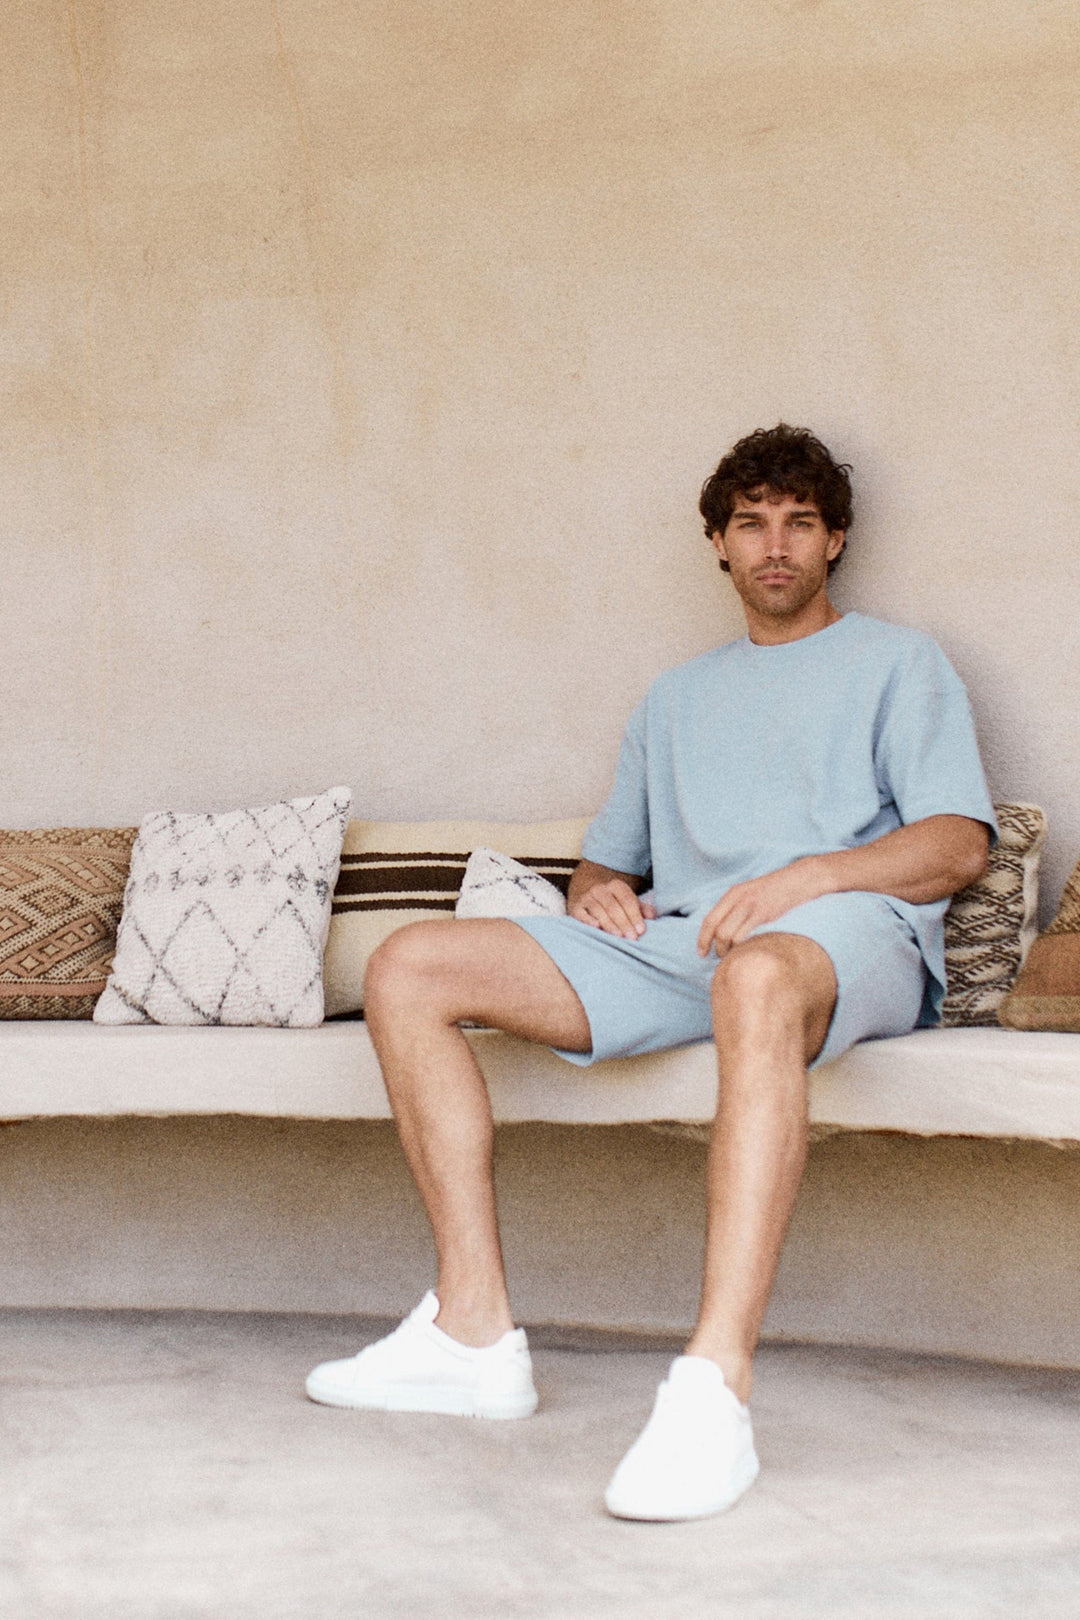 Raval Relaxed Textured Shorts - Powder Blue